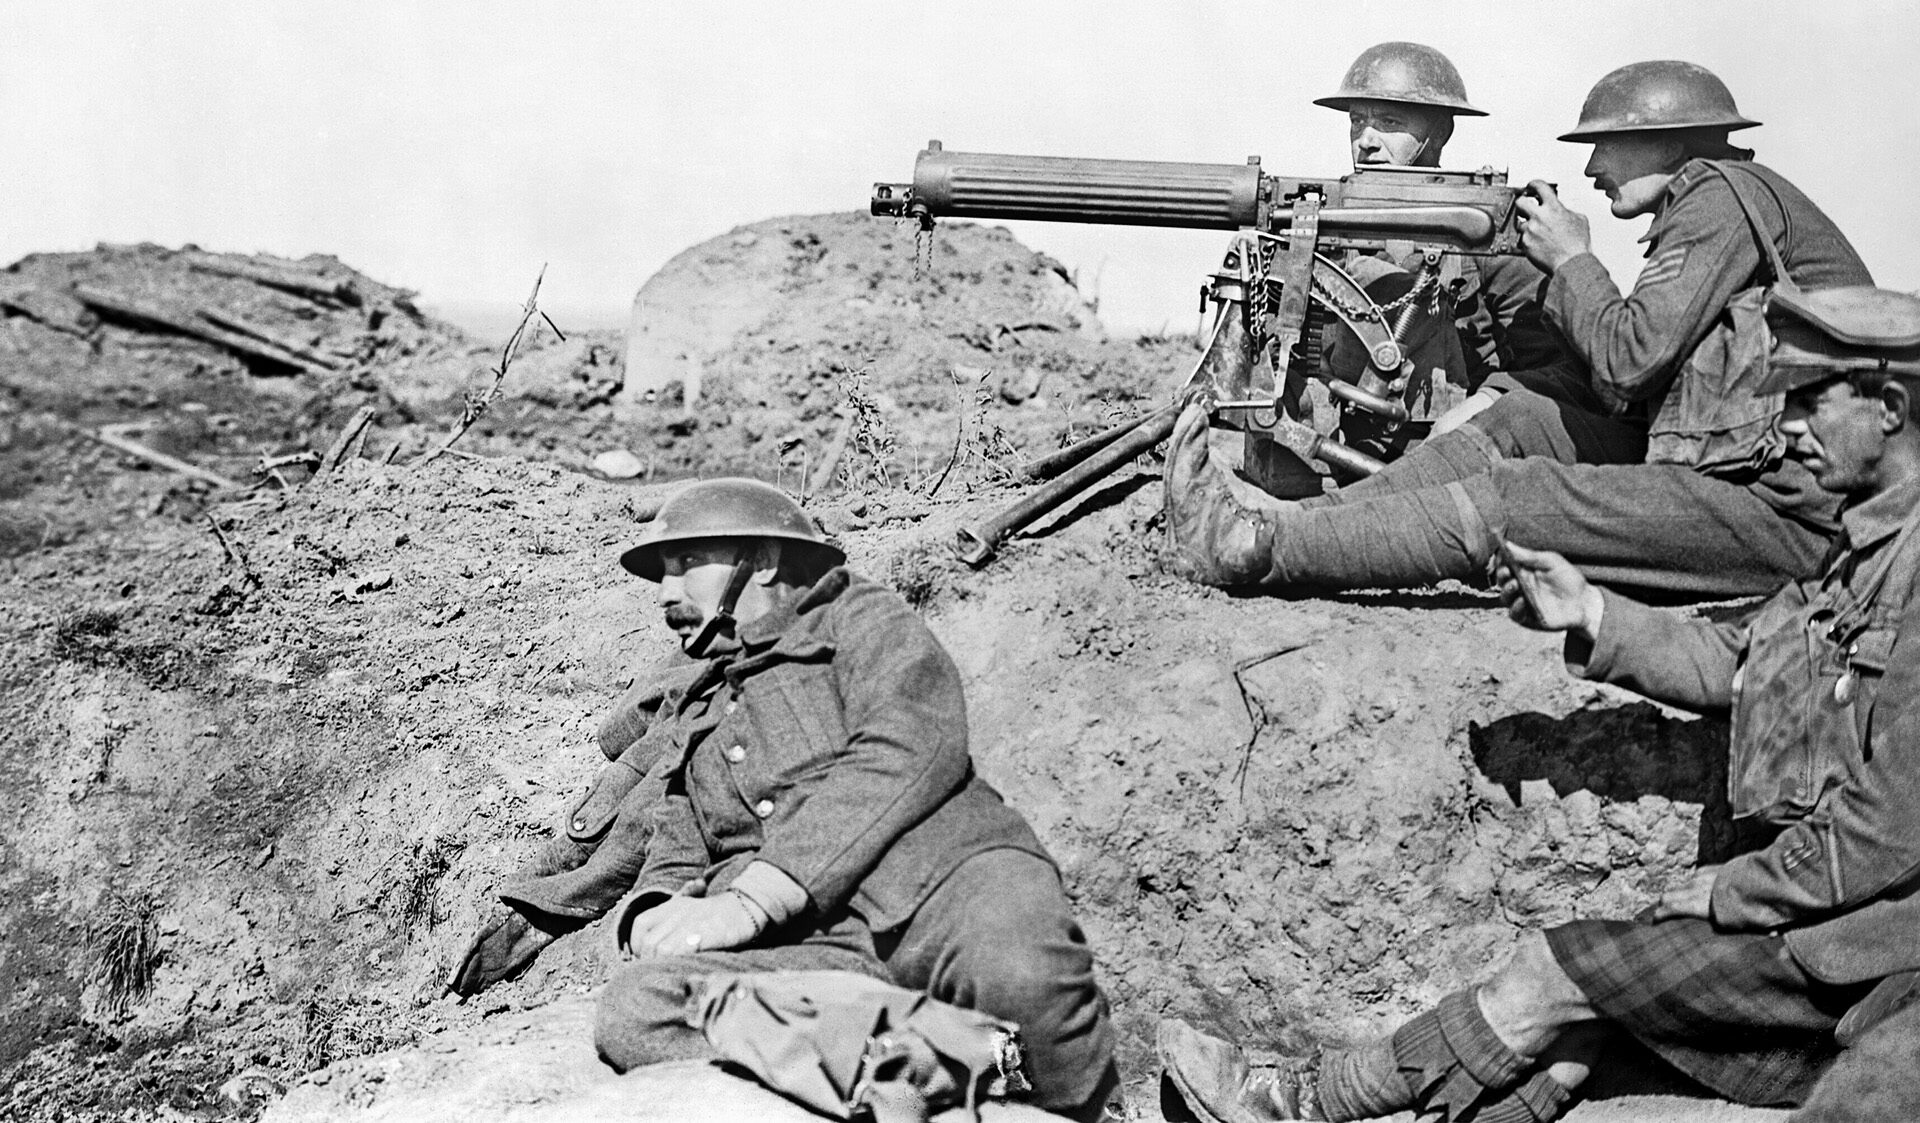 The team of a British Vickers machine gun in action at the battlefront in September. The water-cooled heavy machine gun performed extremely well in the muddy conditions of the battlefield, but used copious amounts of ammunition.